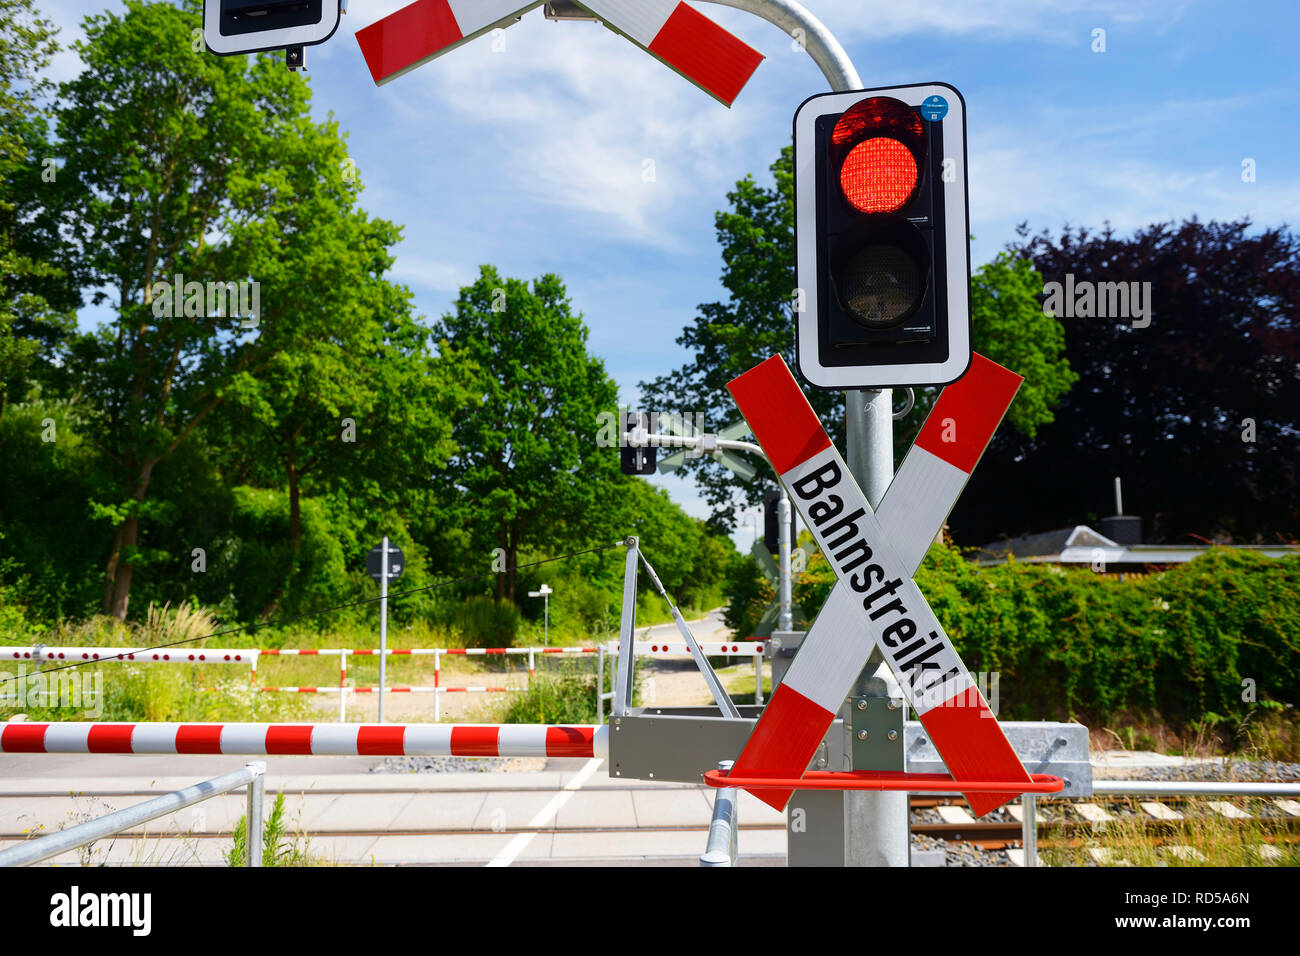 Level crossing with St Andrew's Cross and label Road strike, Photomontage, Bahnübergang mit Andreaskreuz und Aufschrift Bahnstreik, Fotomontage Stock Photo